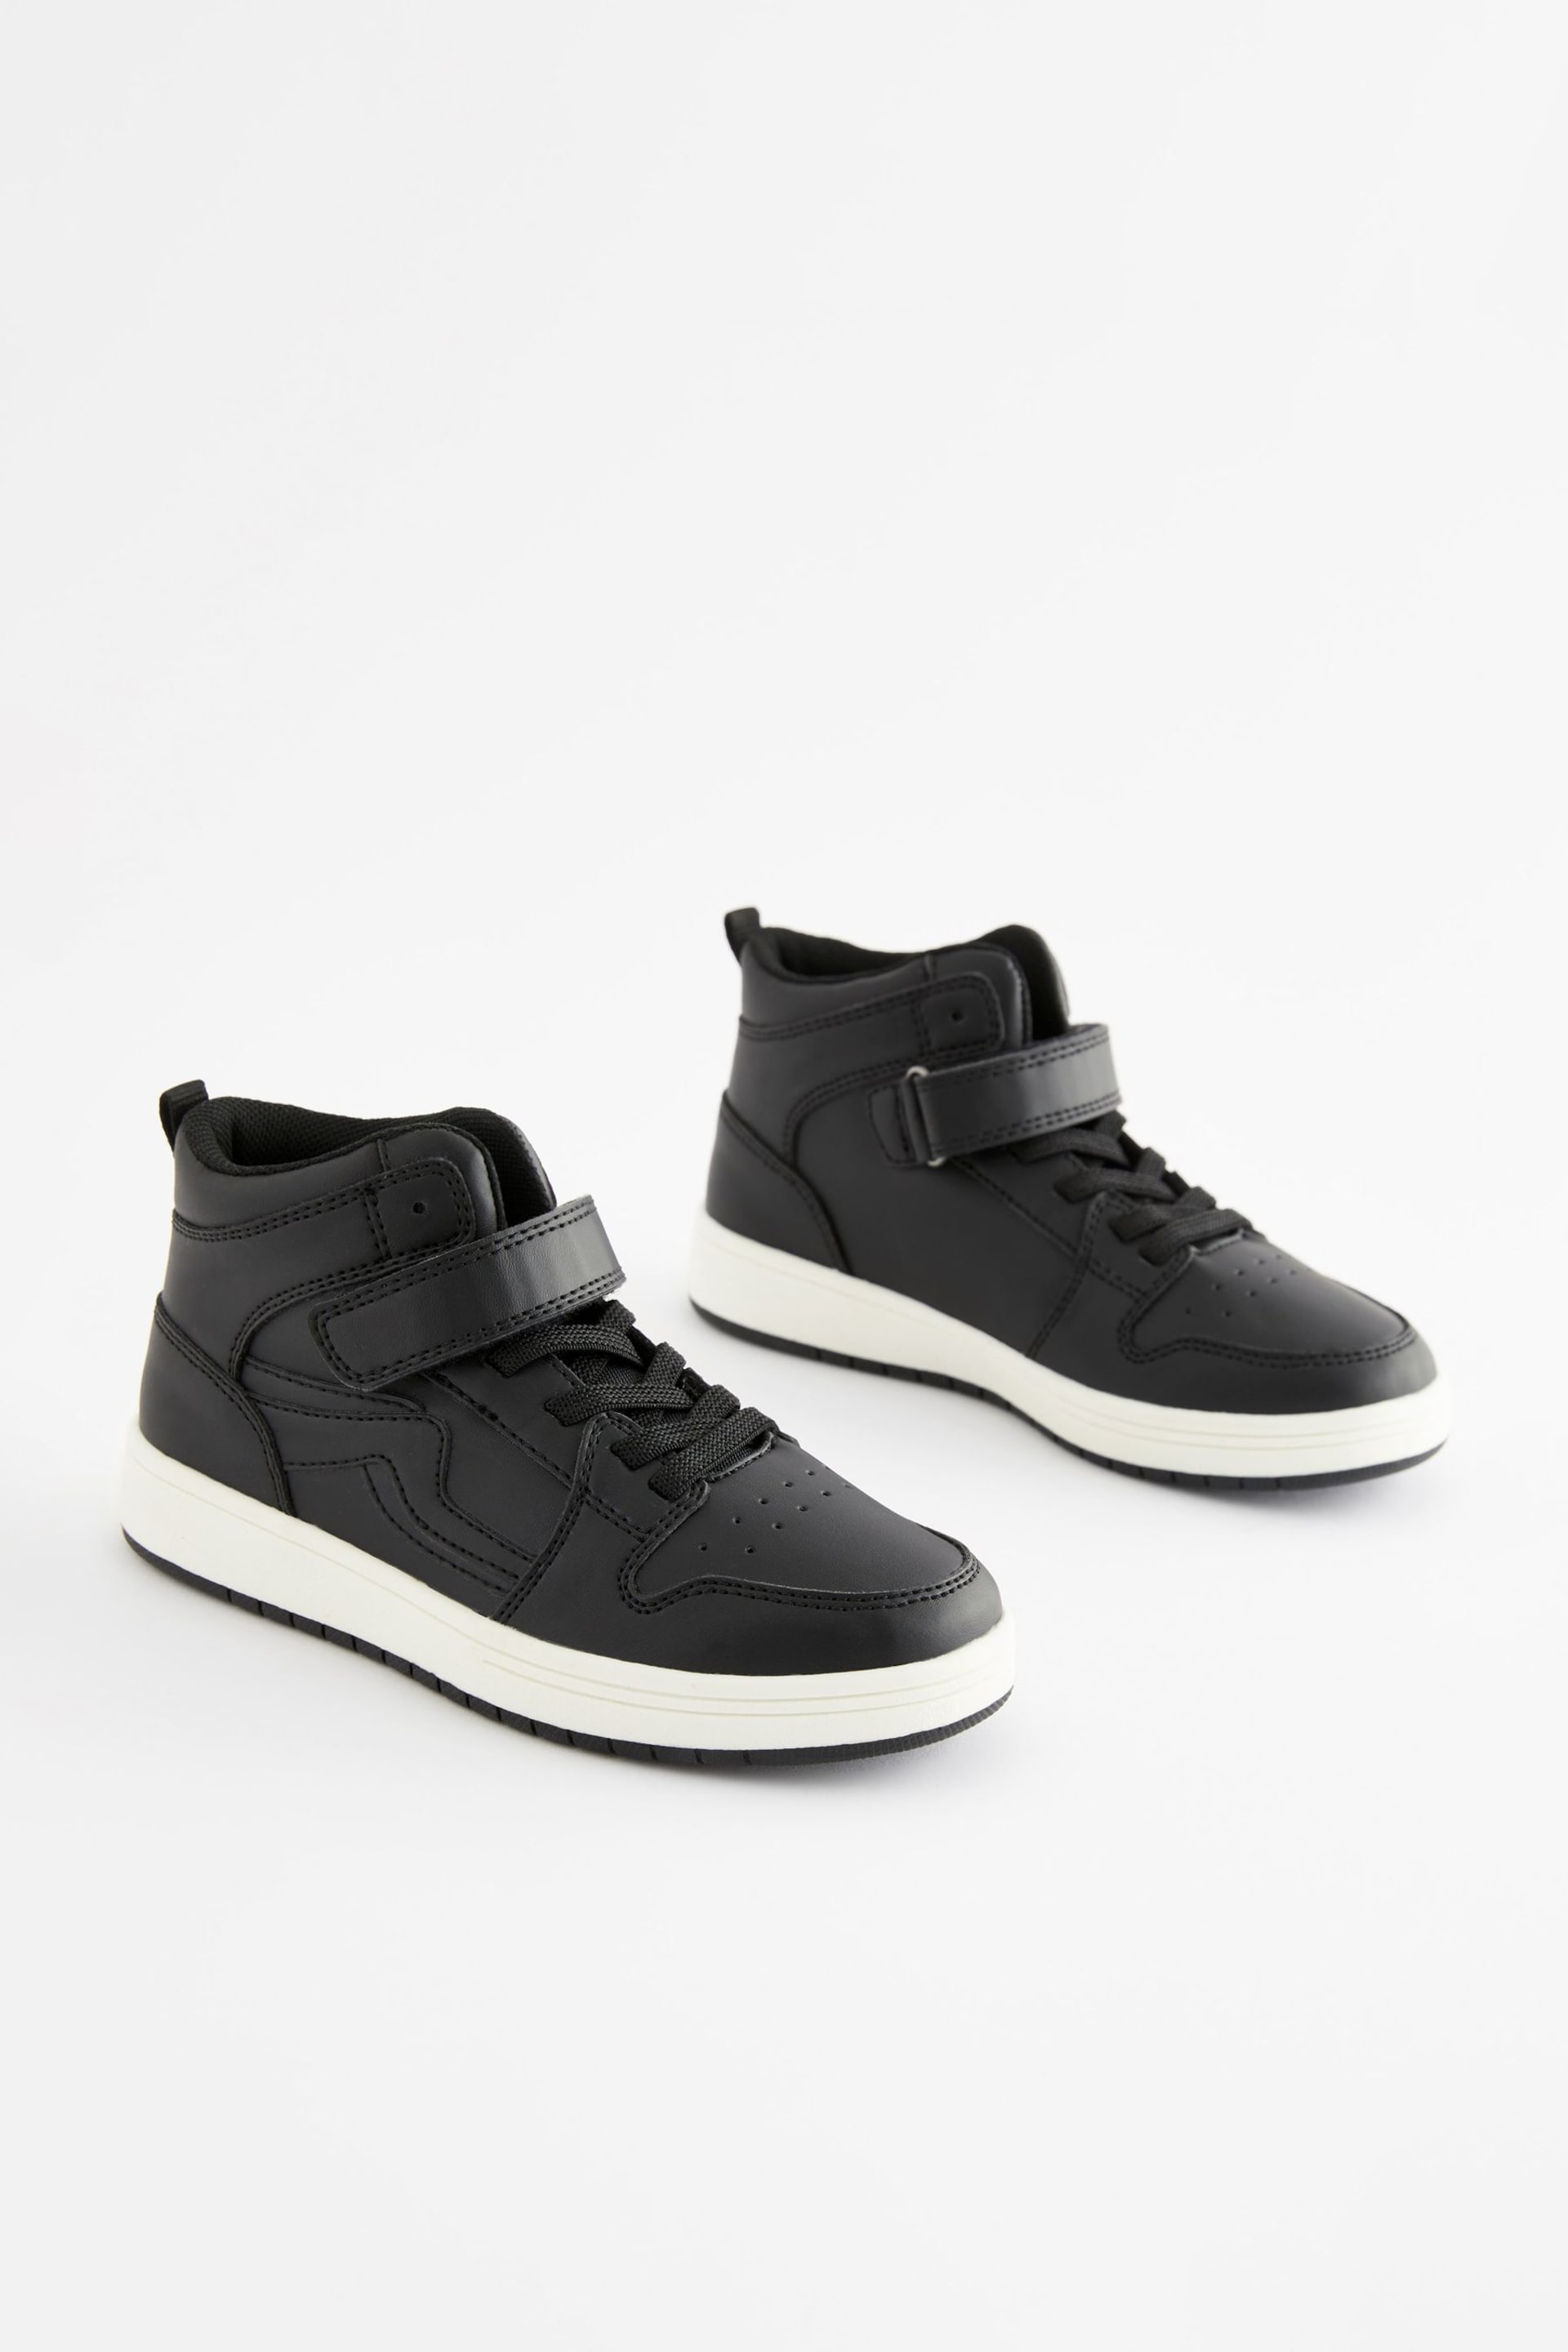 Black Elastic Lace High Top Trainers - Image 5 of 8